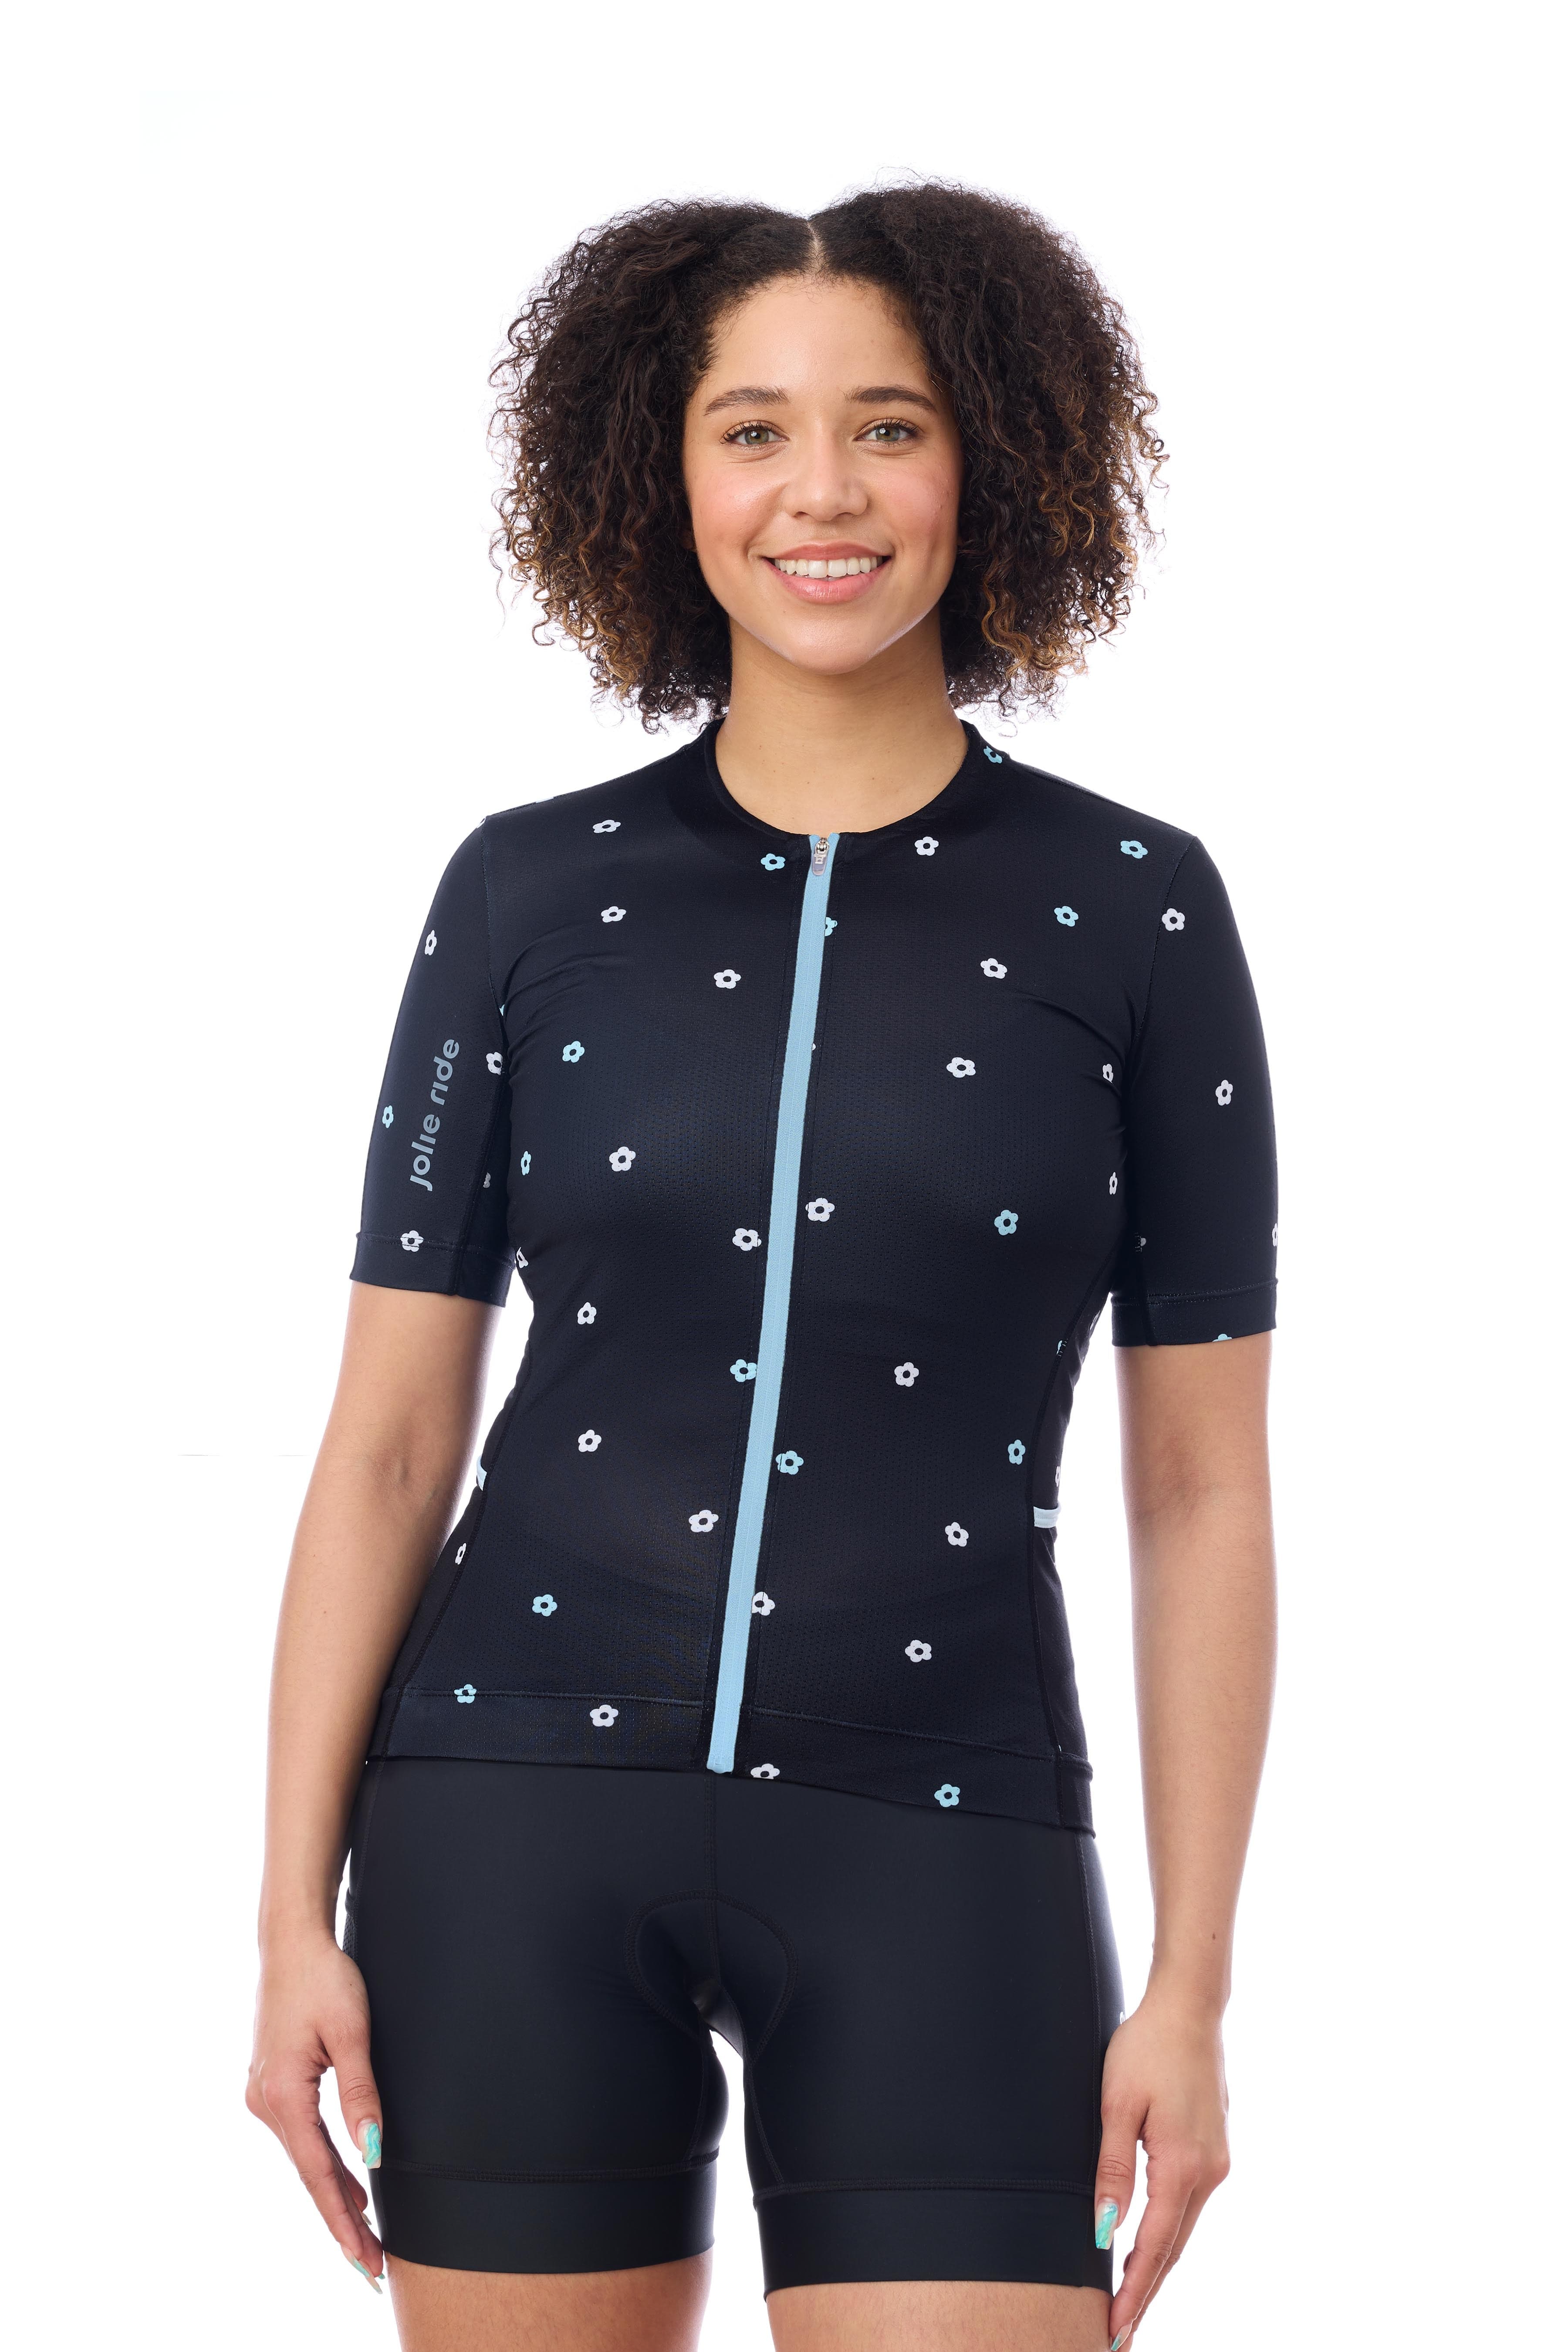 JolieRide Jersey low collar cycling jersey with UV protection & storage pockets